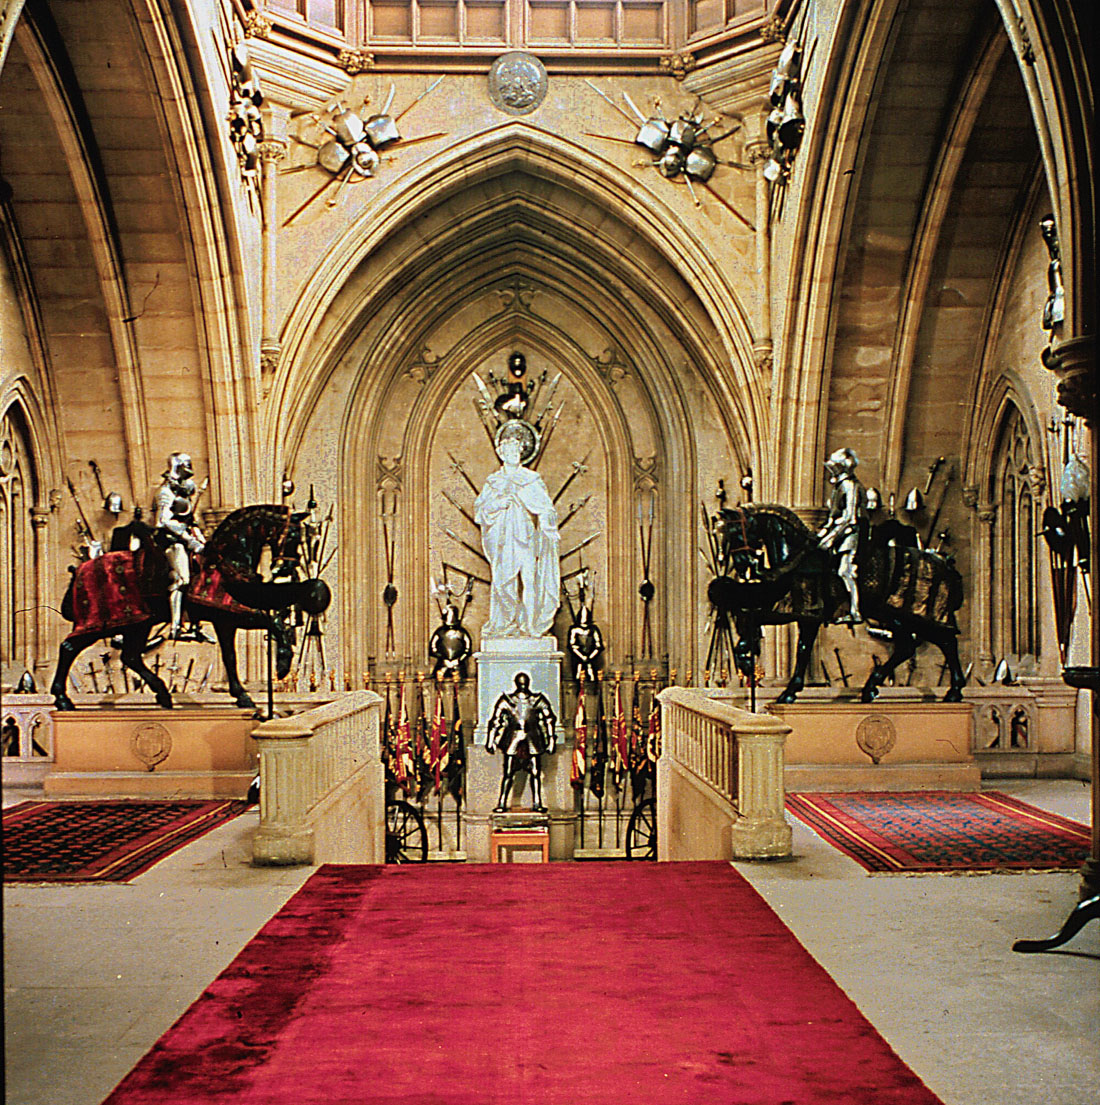 Windsor Castle Historical Facts and Pictures | The History Hub